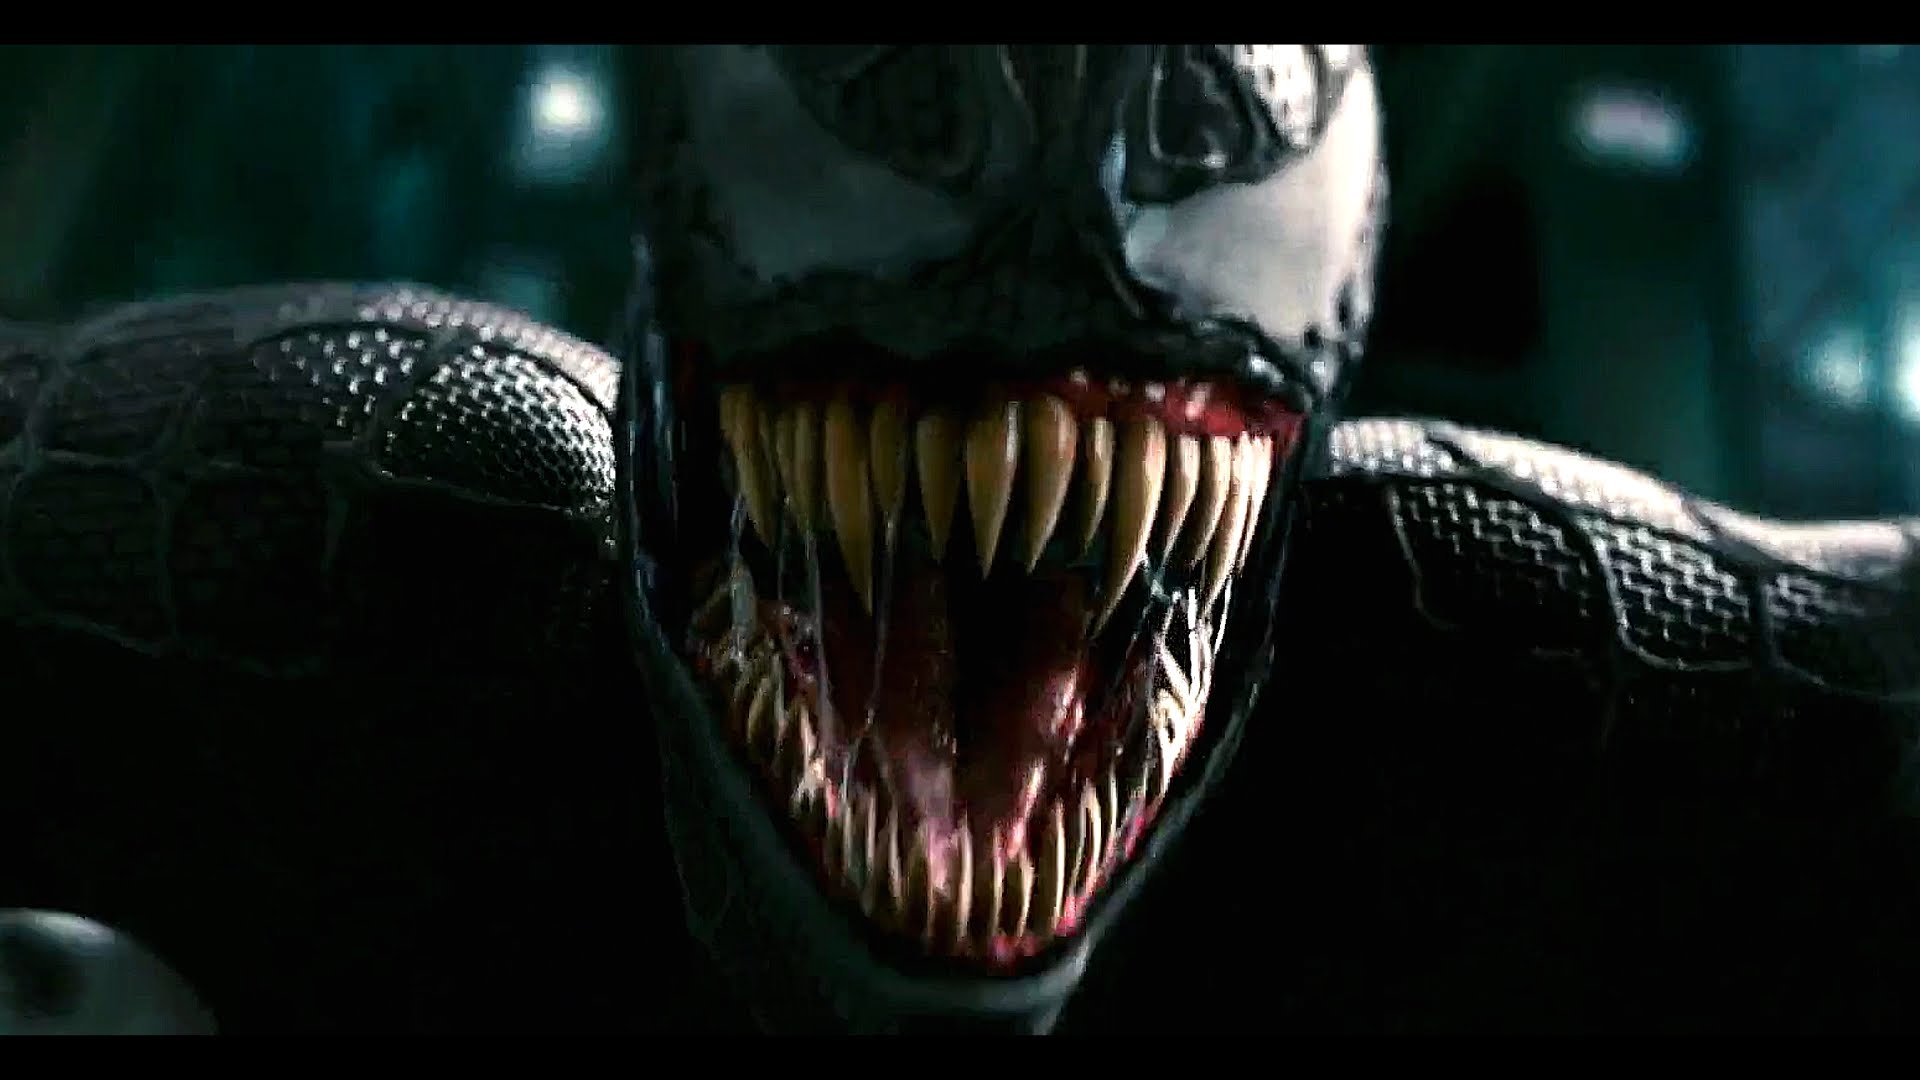 Sony just announced that a ‘Venom’ movie is coming October 2018